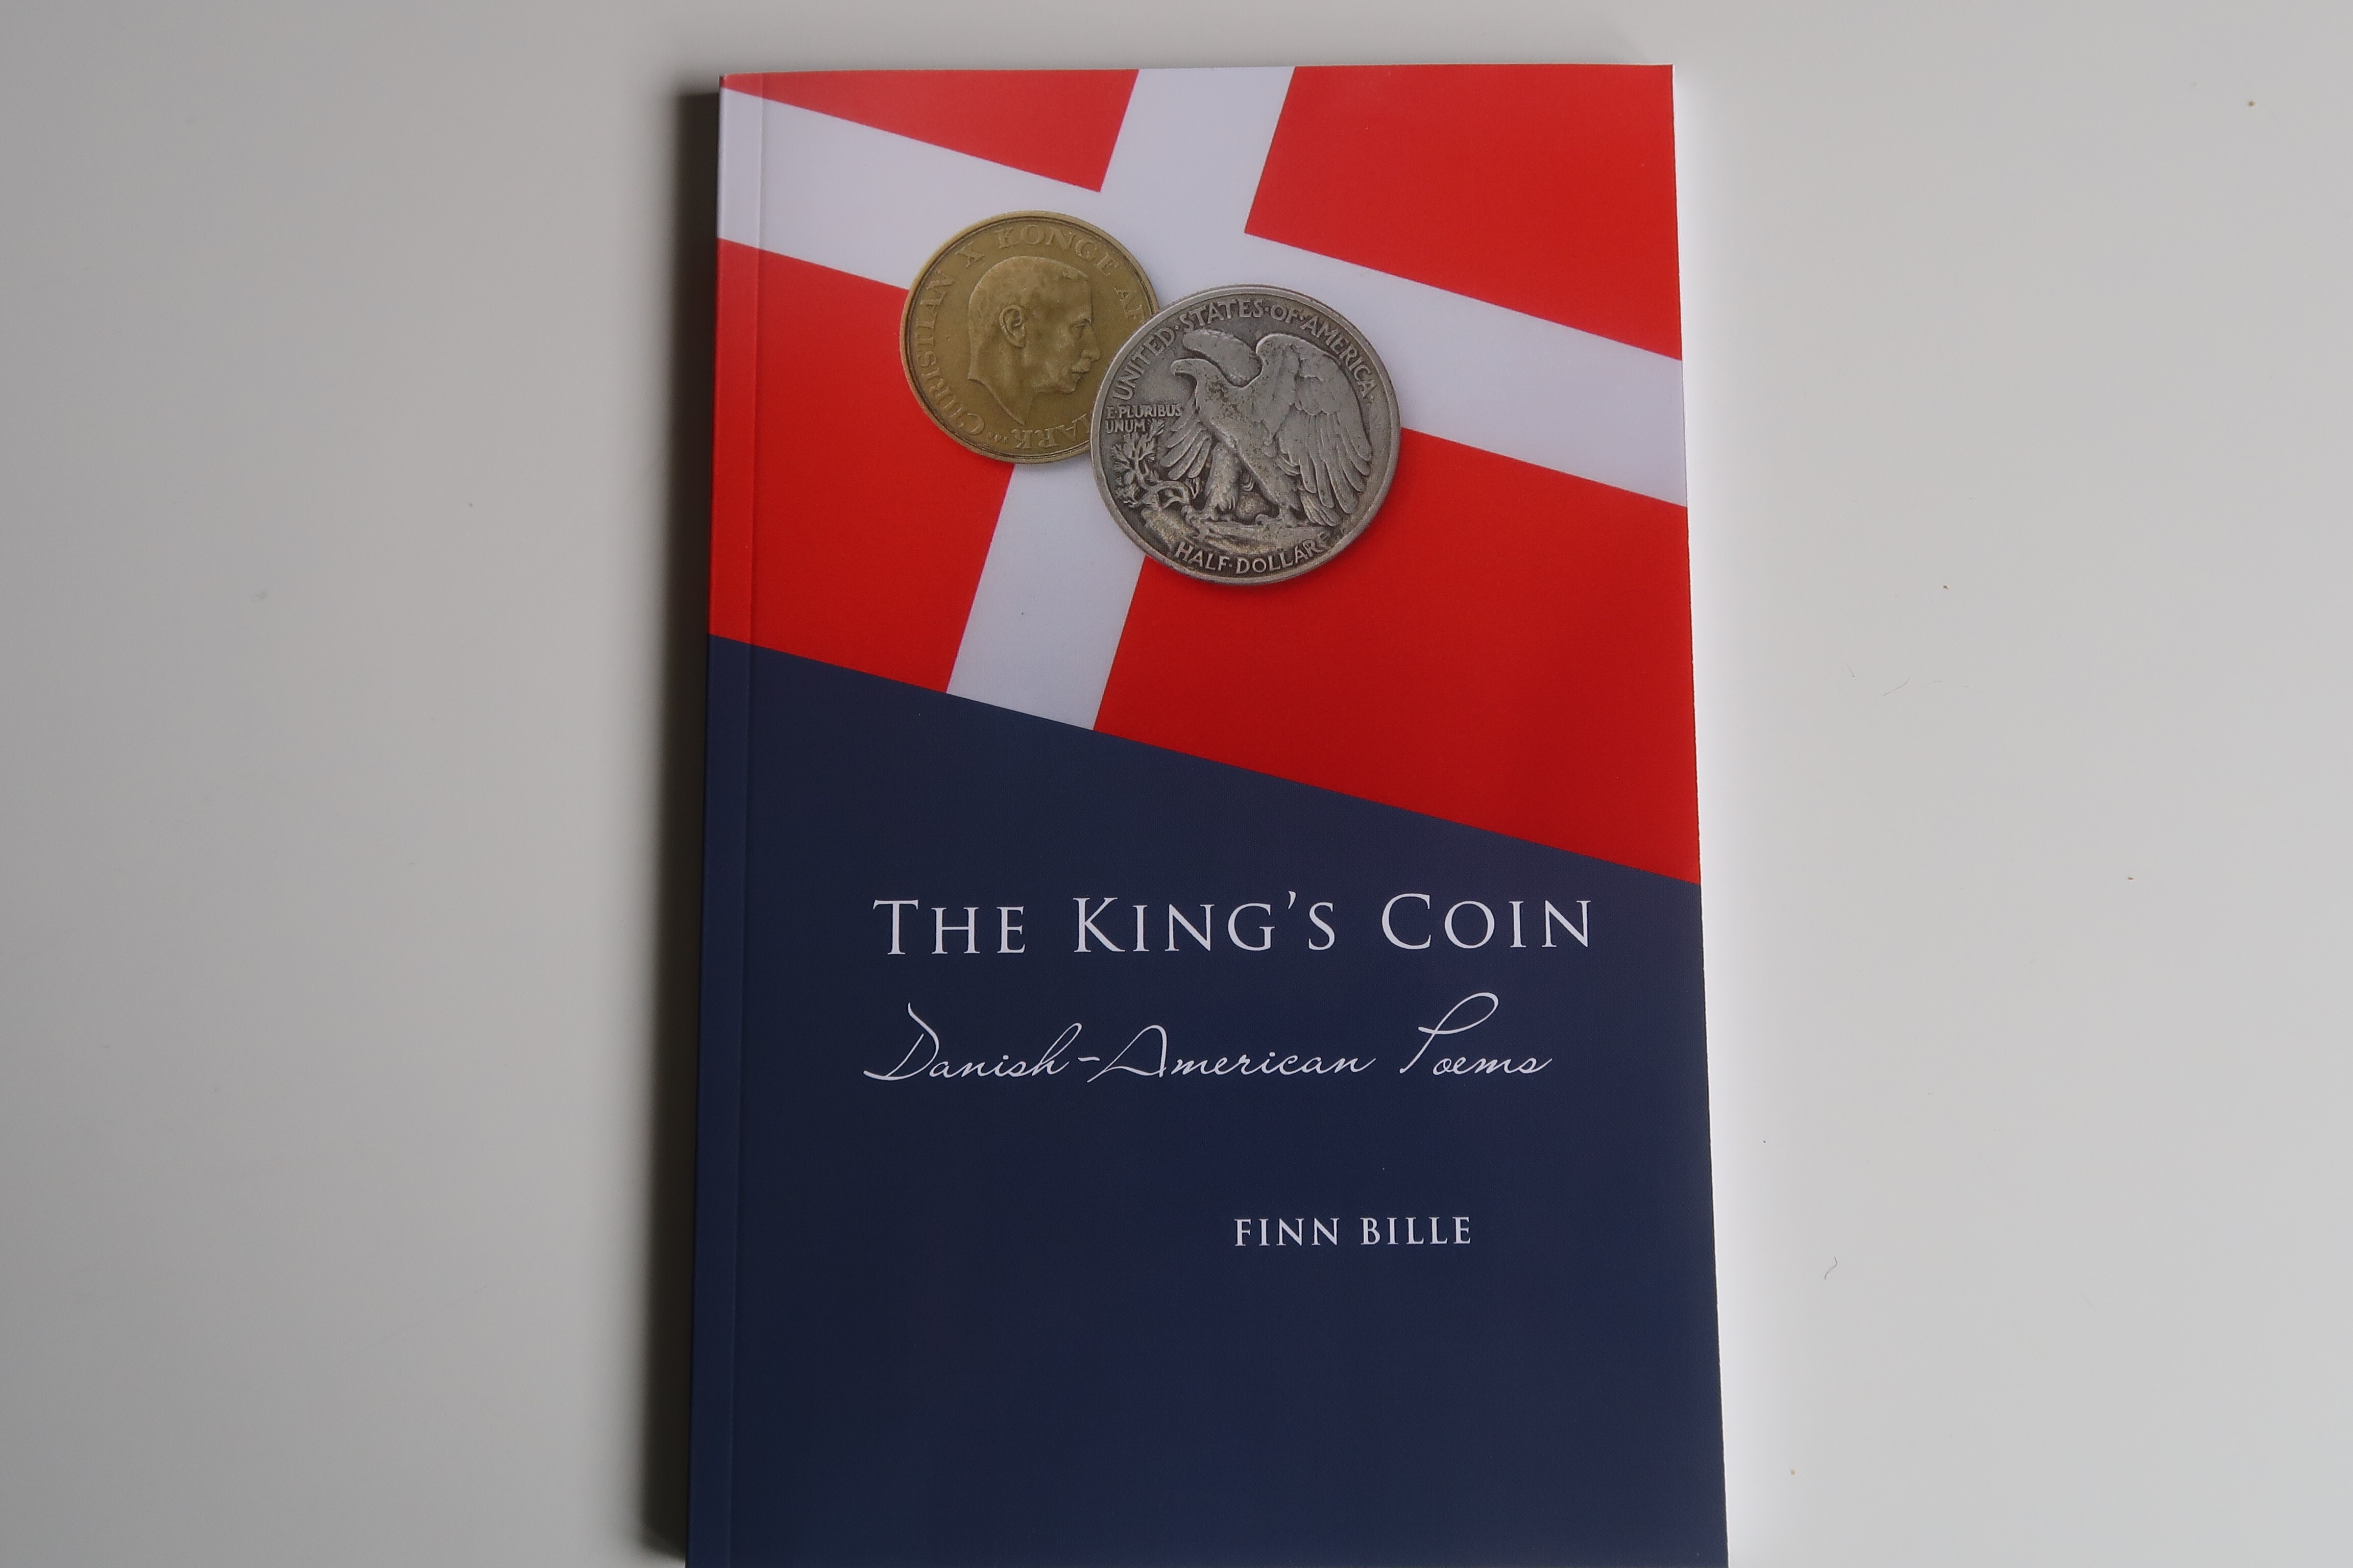 The King's Coin:  Danish American Poems by Finn Bille